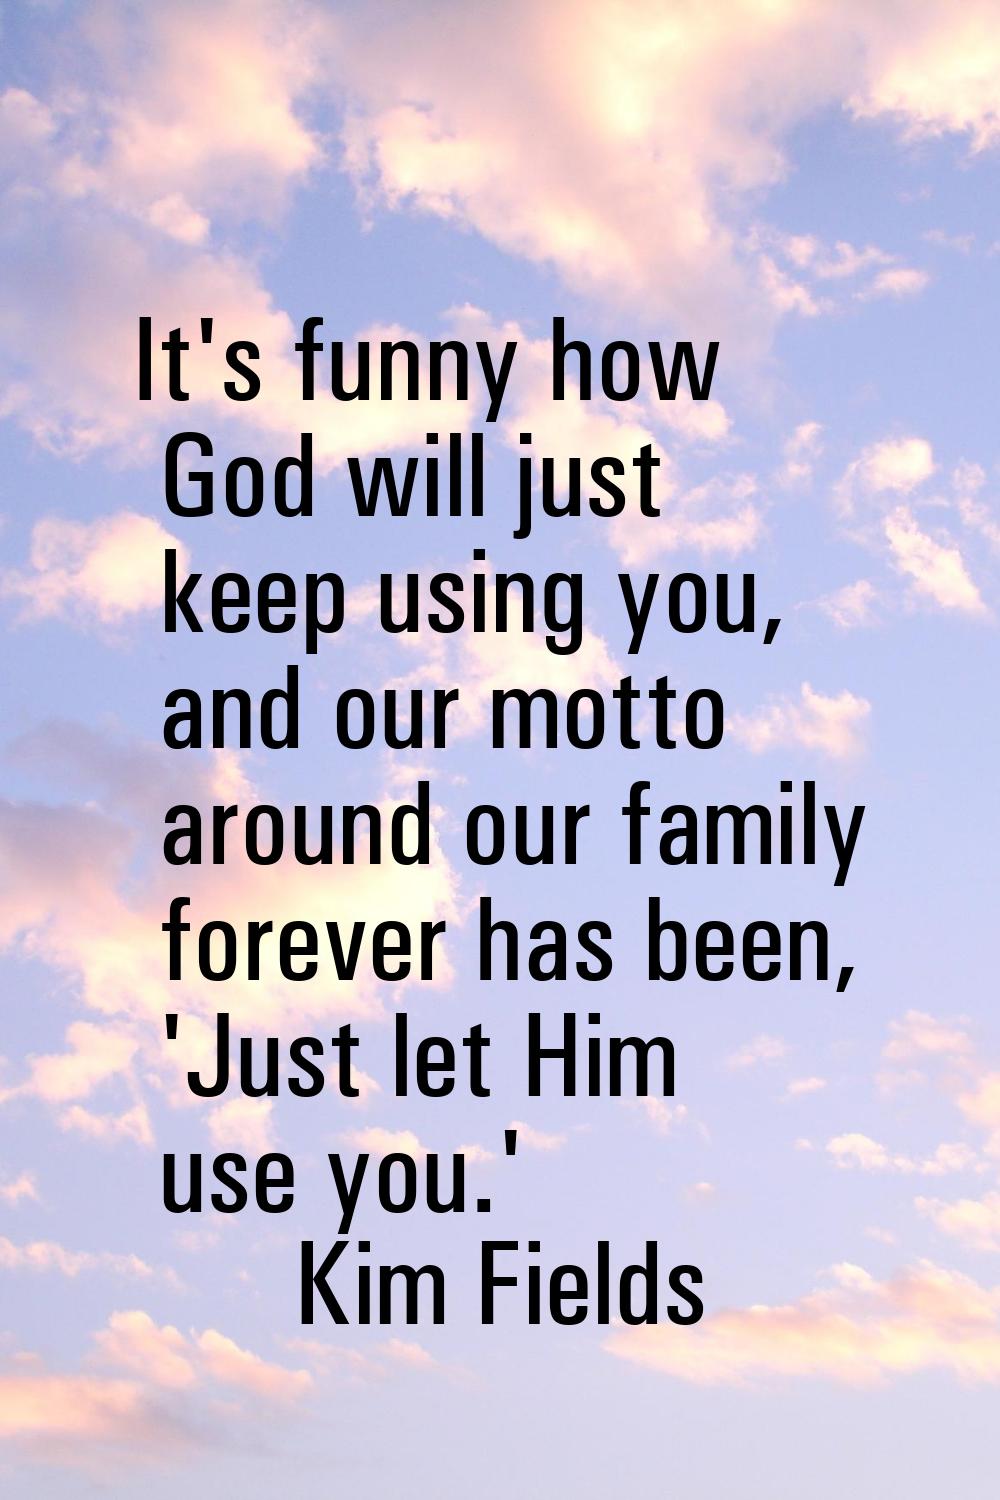 It's funny how God will just keep using you, and our motto around our family forever has been, 'Jus